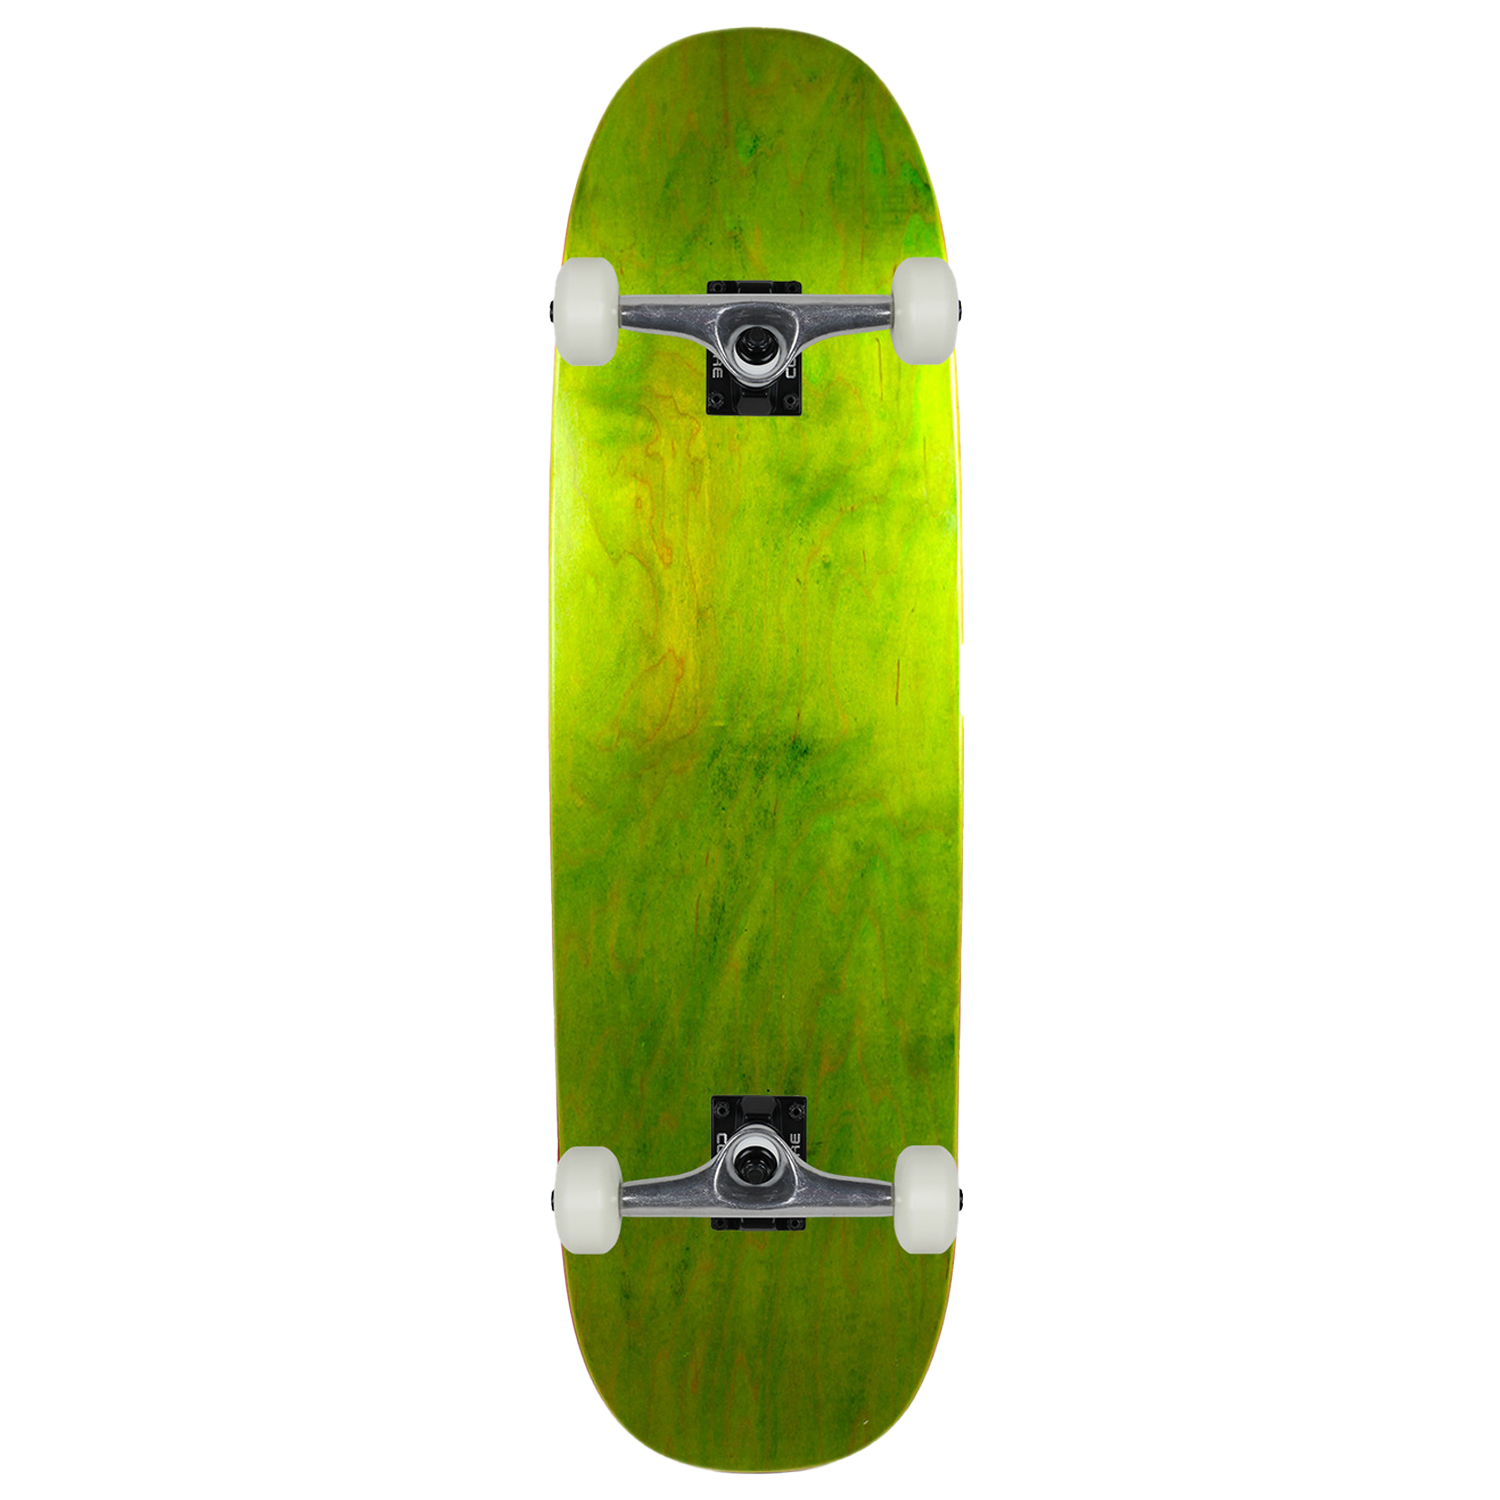 Moose Skateboard Old School Complete Blunt Nose Popsicle Stain Lime 8.75in x 32.1in